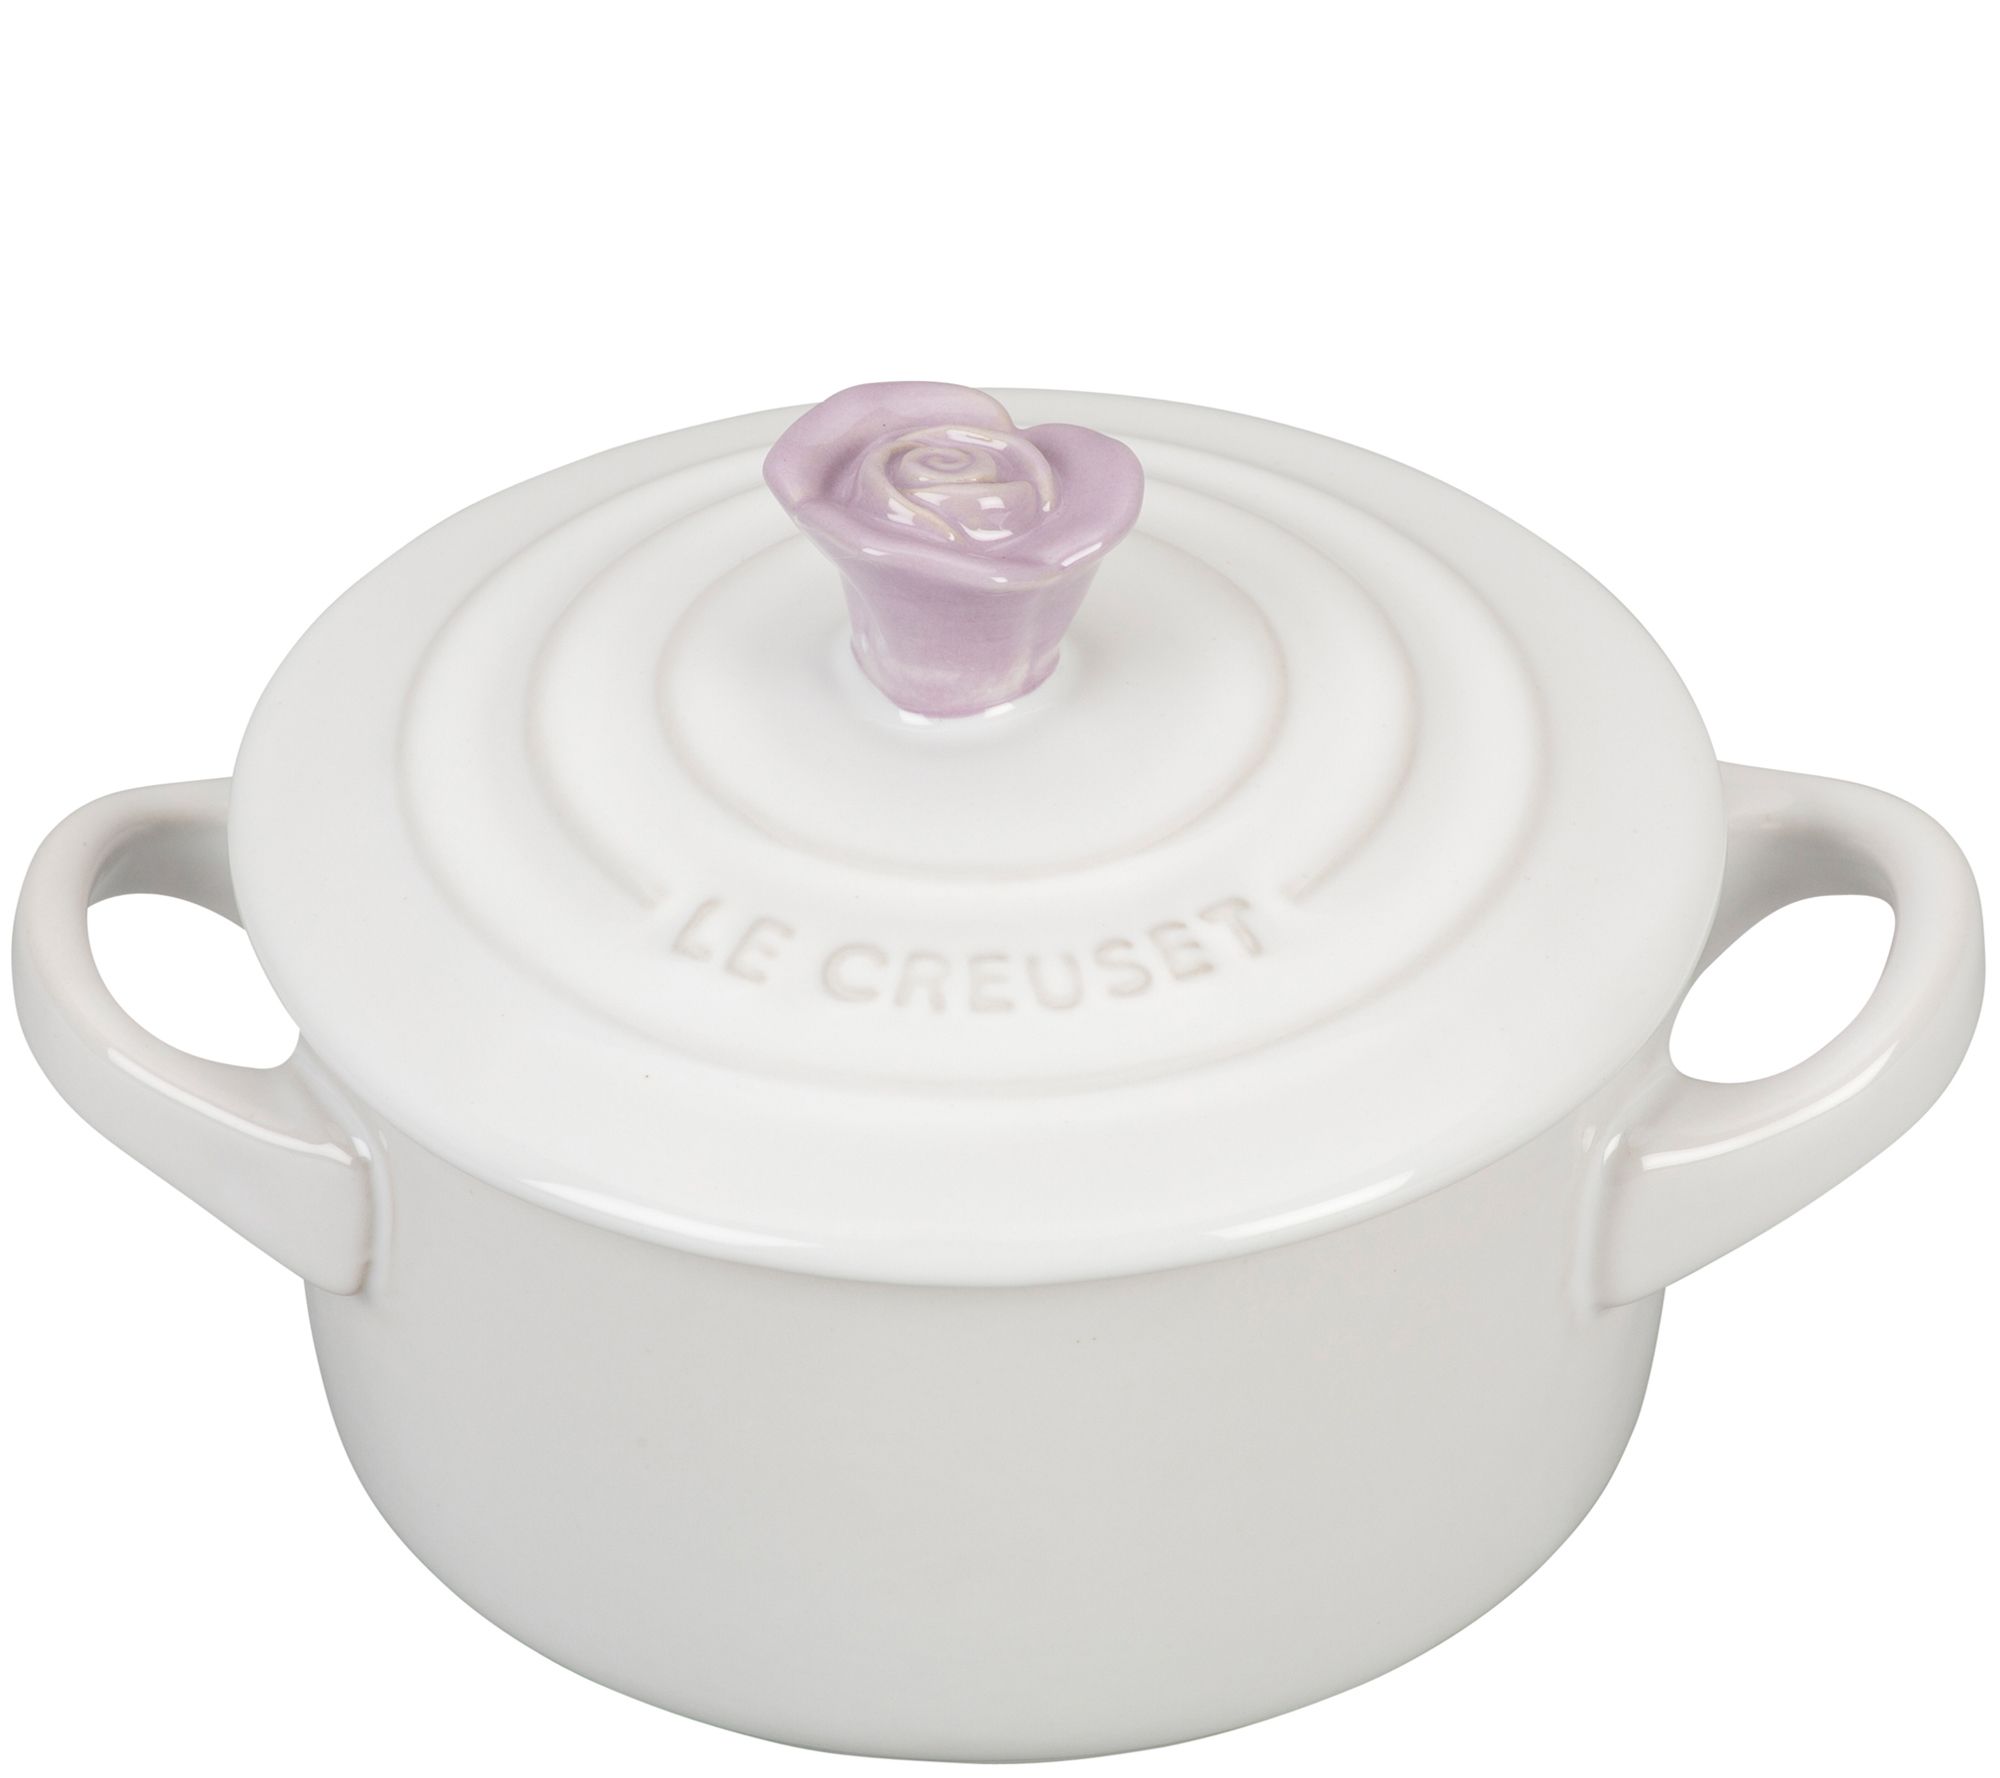 Mini Cocotte with Flower Lid